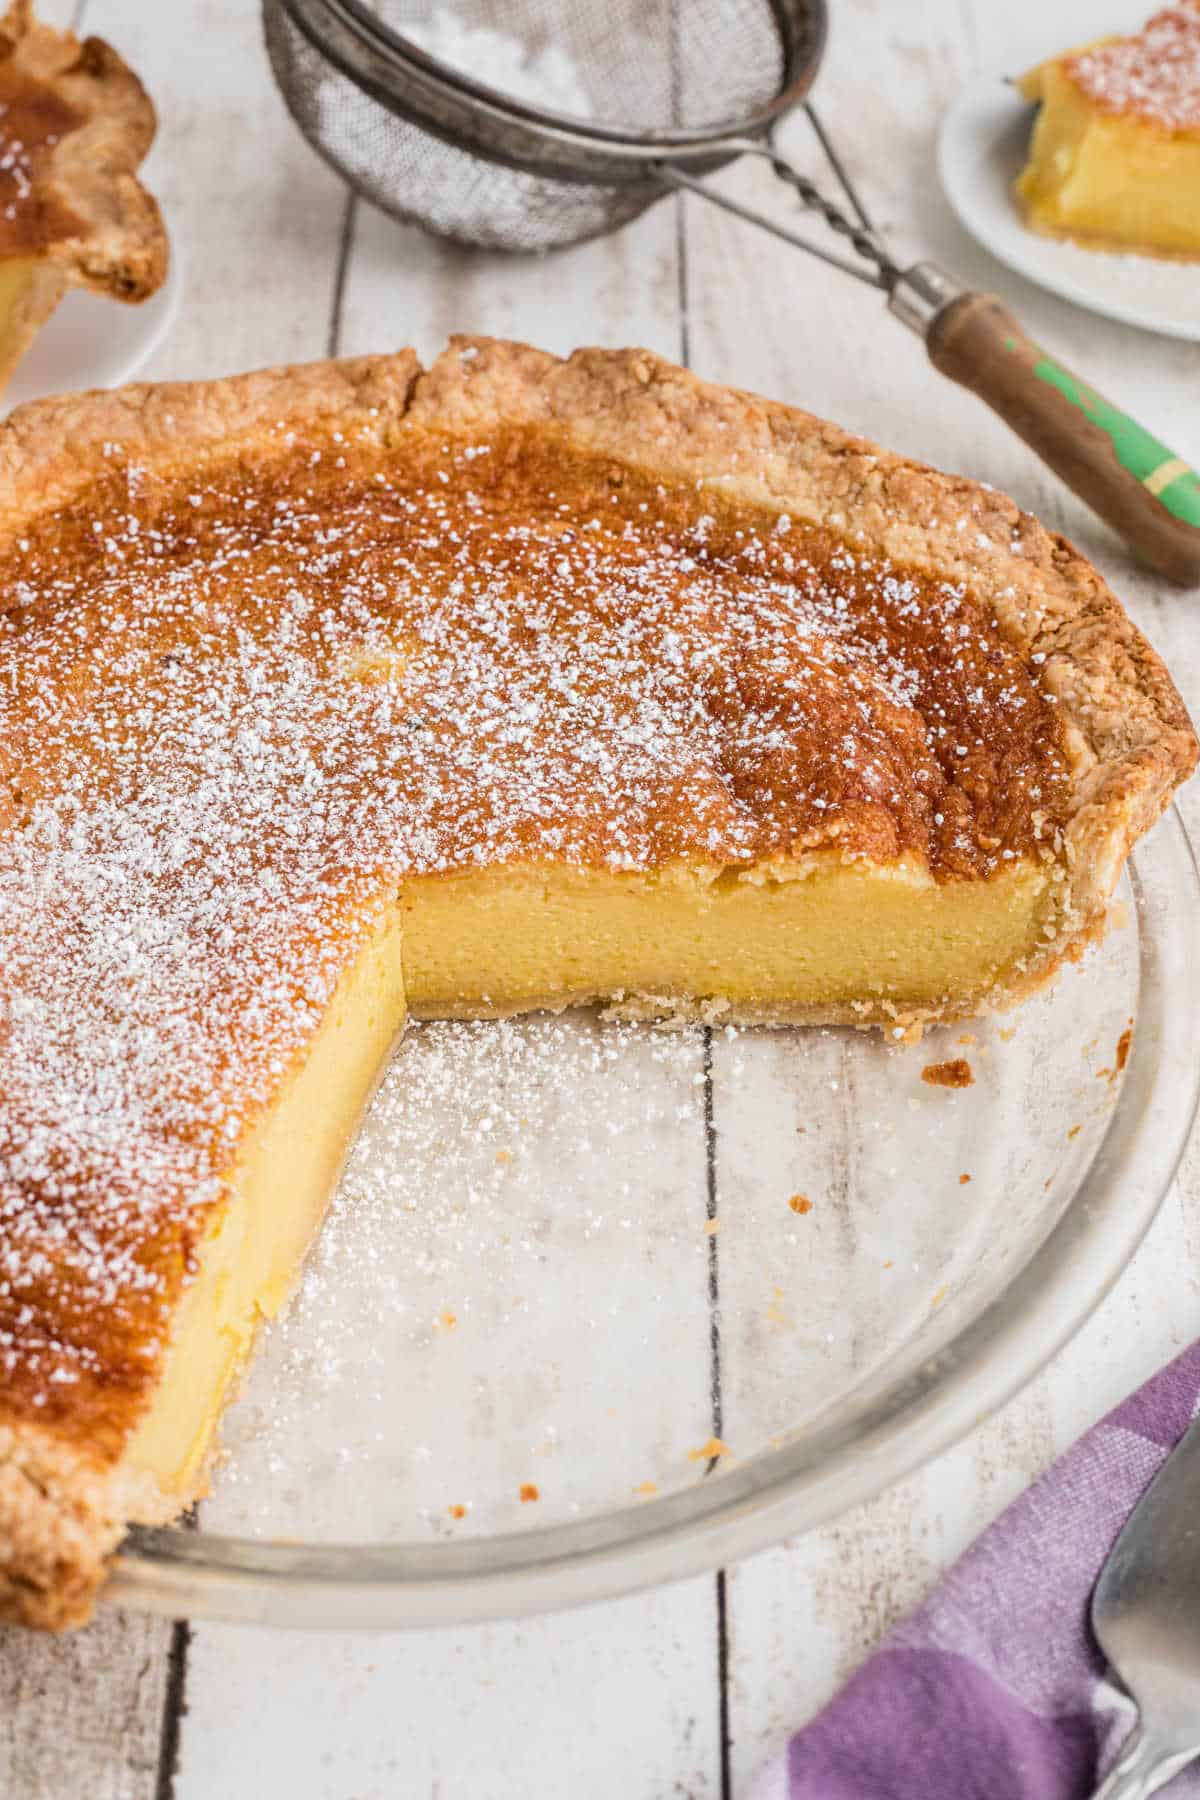 An old fashioned chess pie with some slices missing.